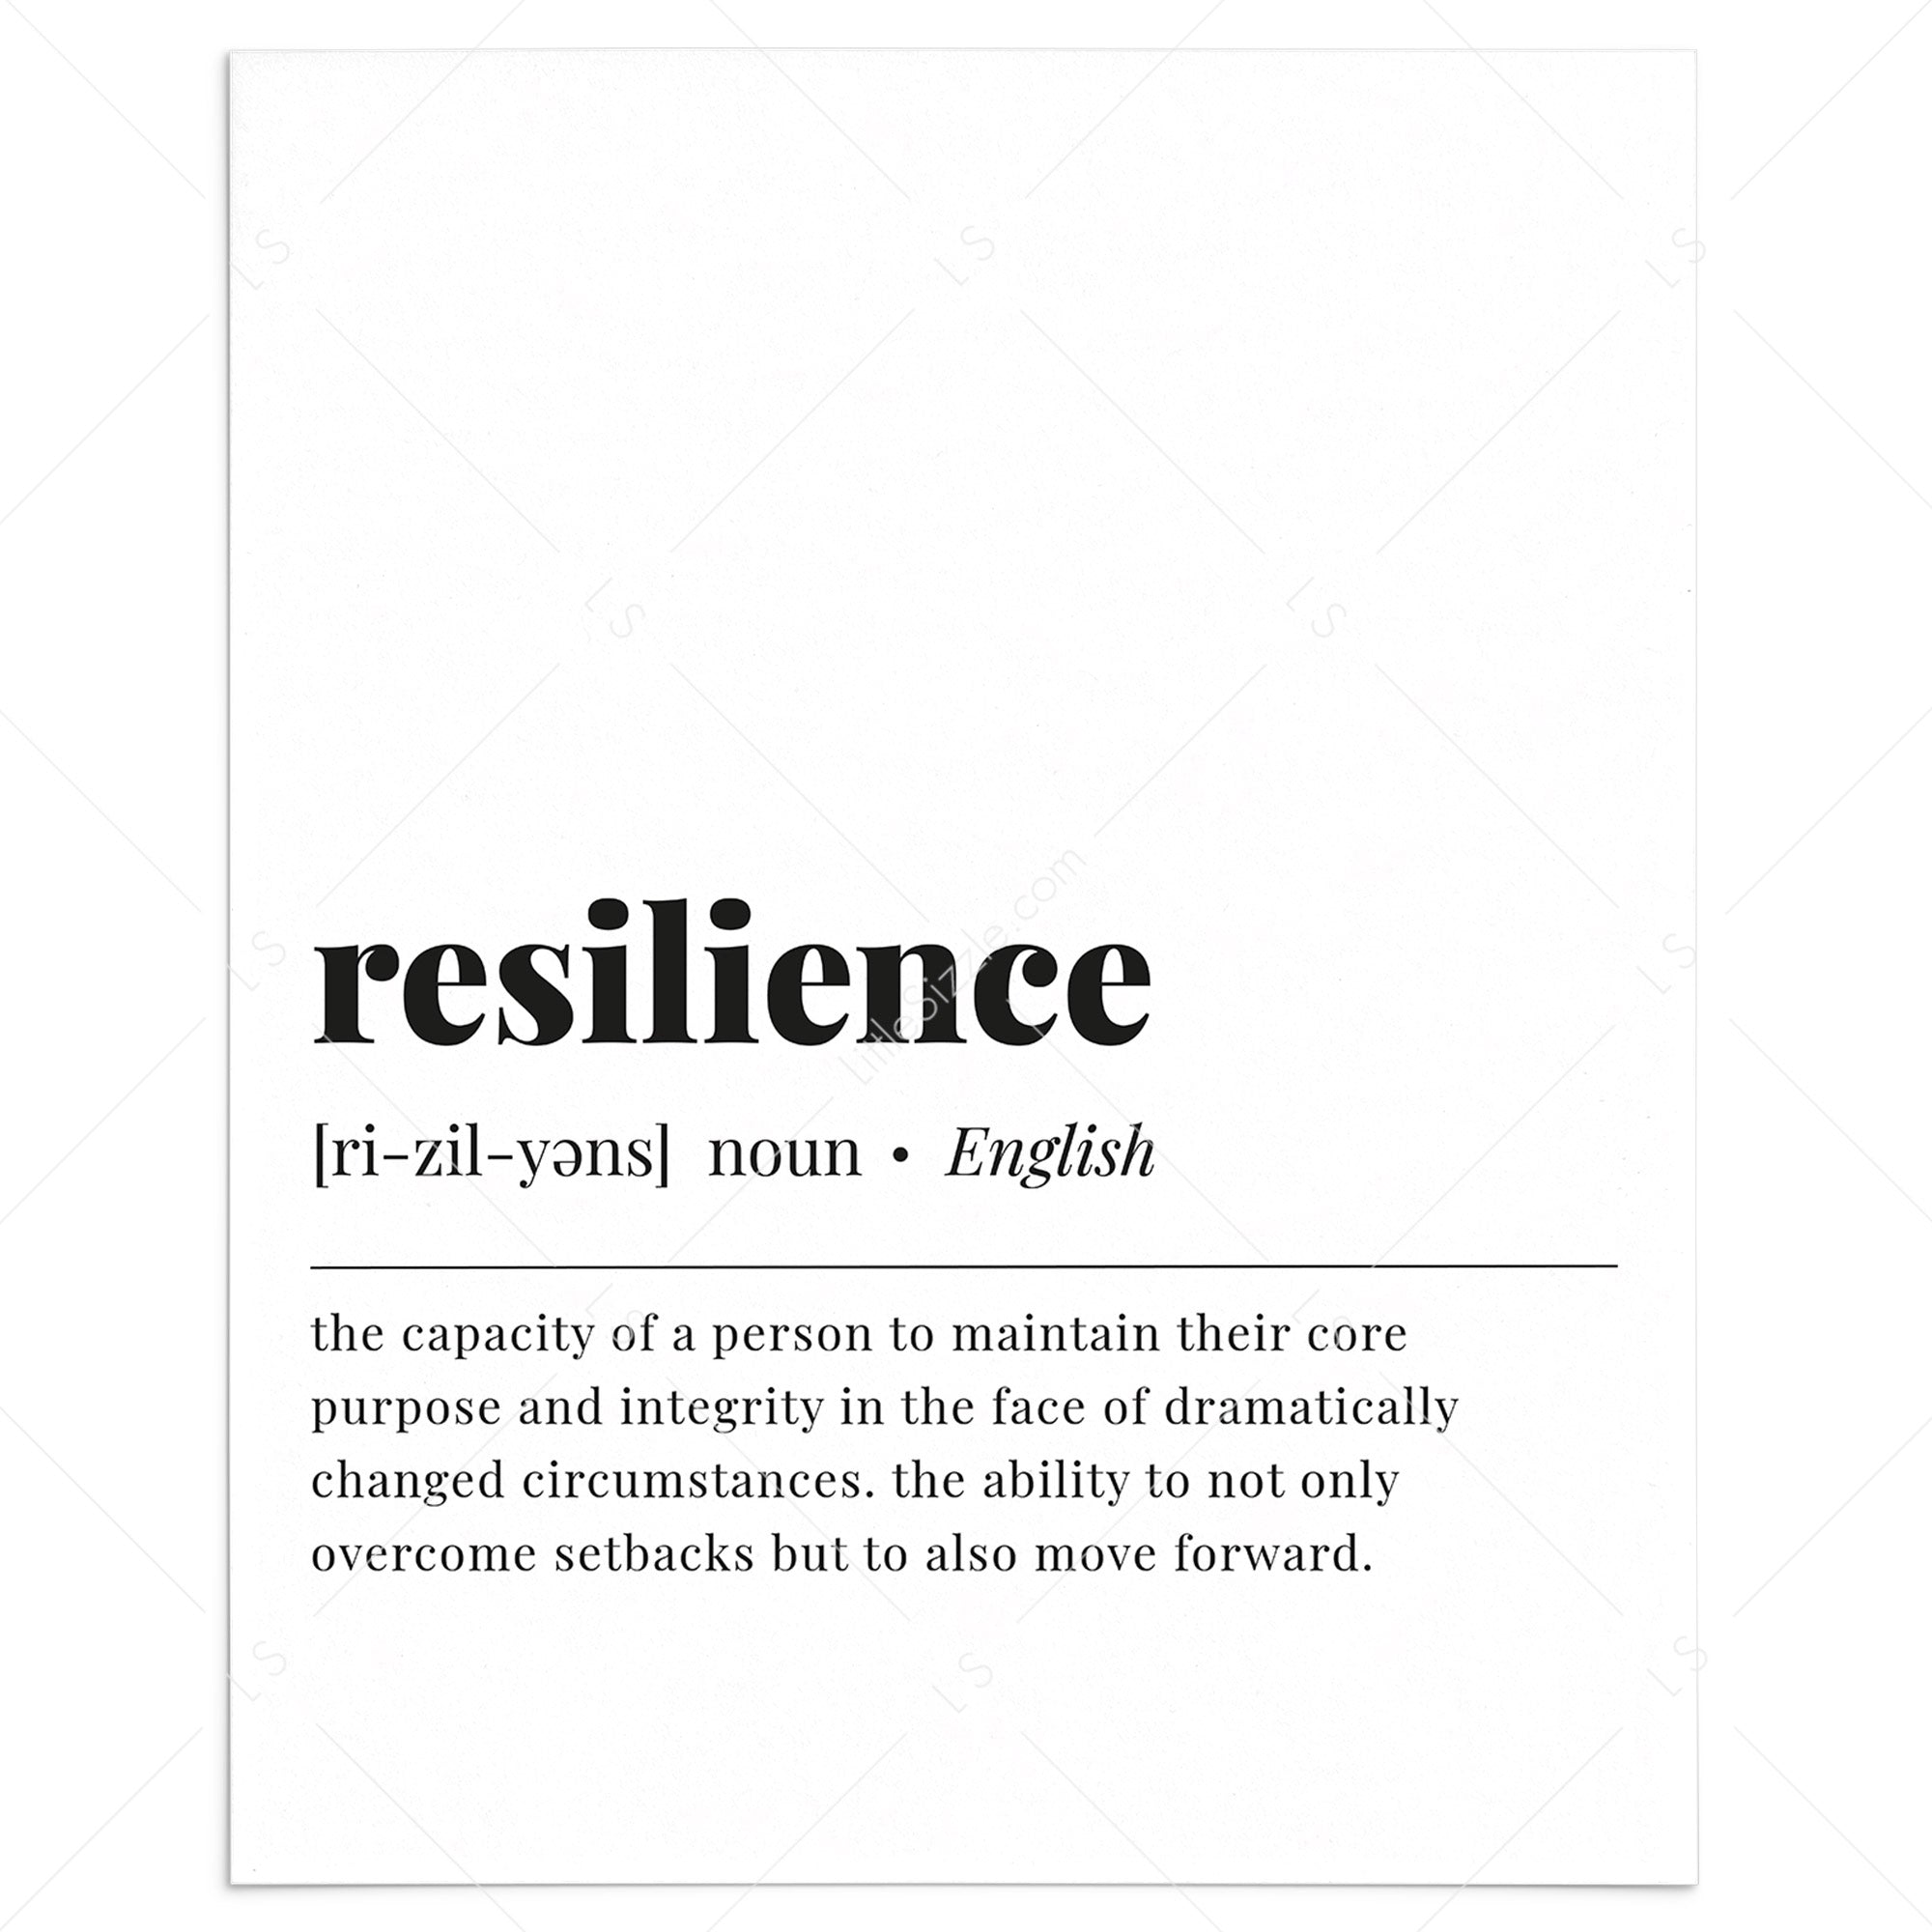 resilience poster